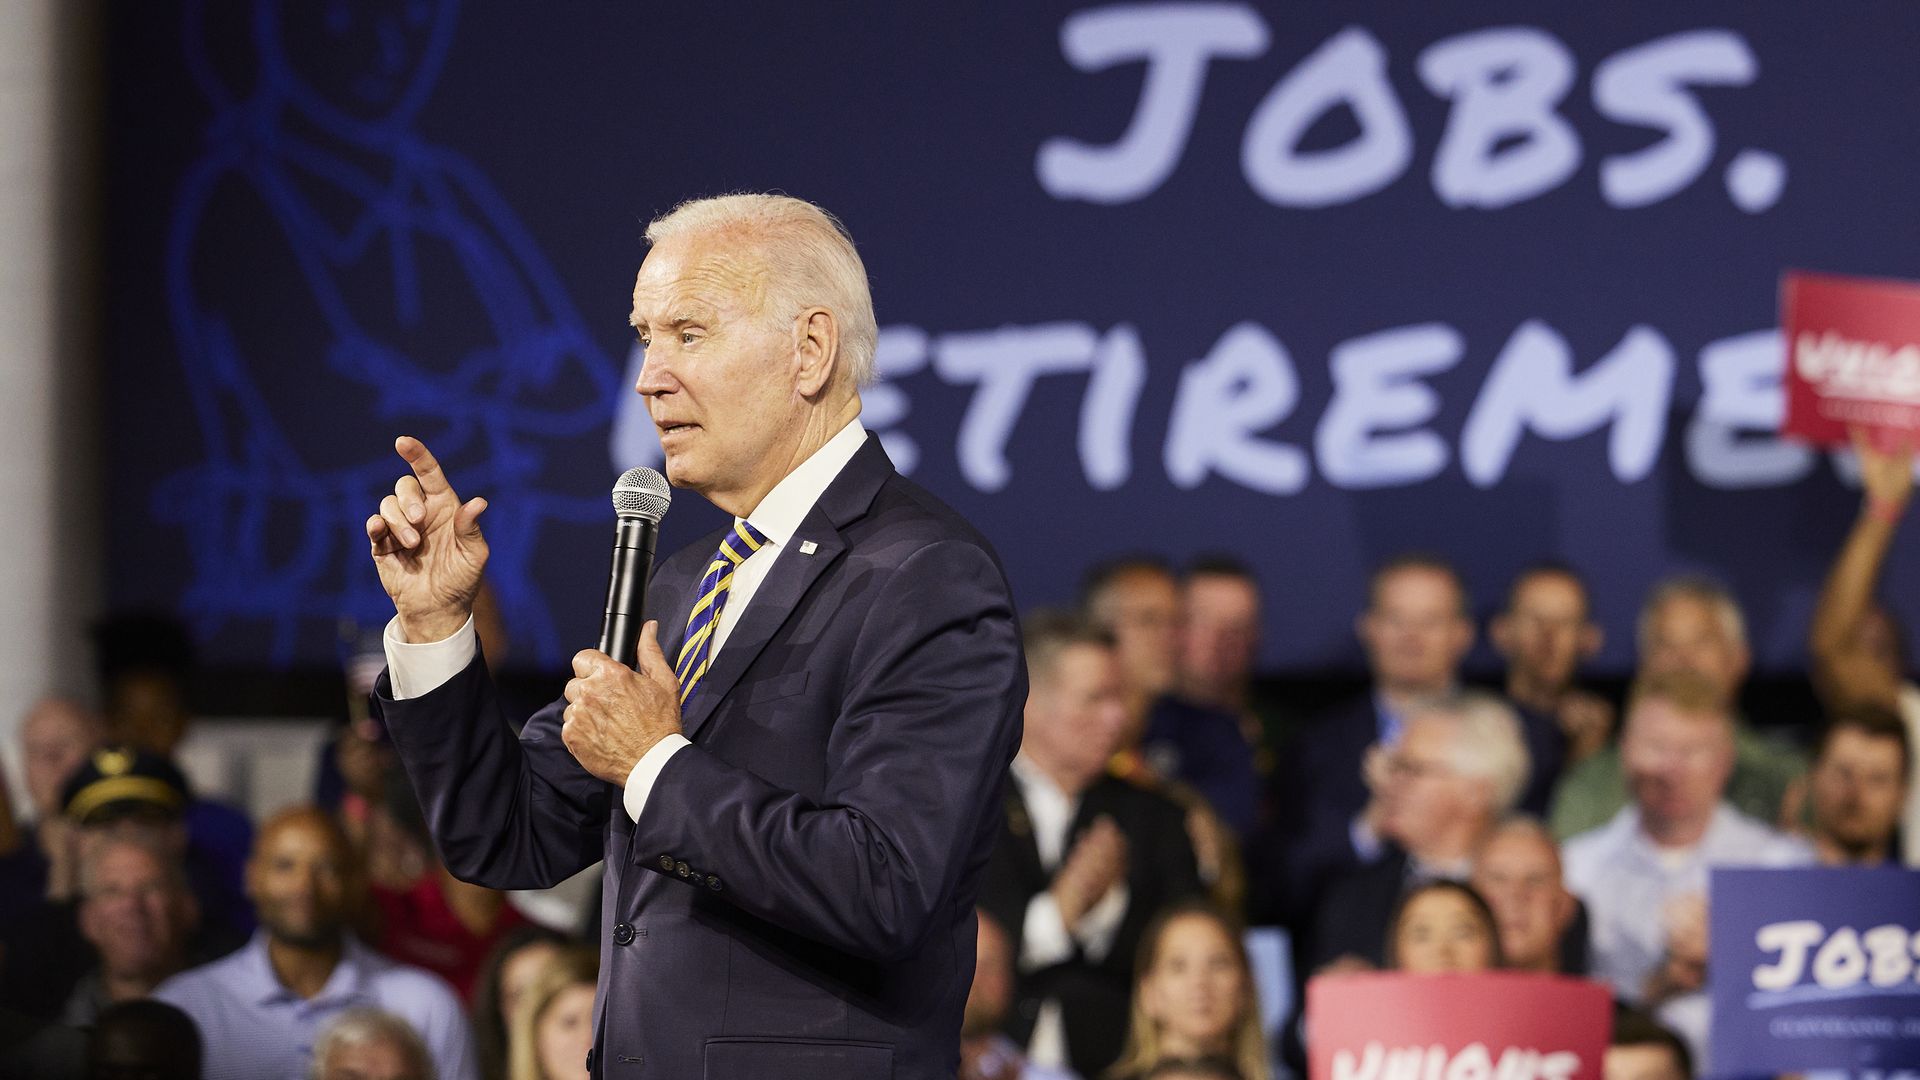 Biden wags his finger in front of a sign